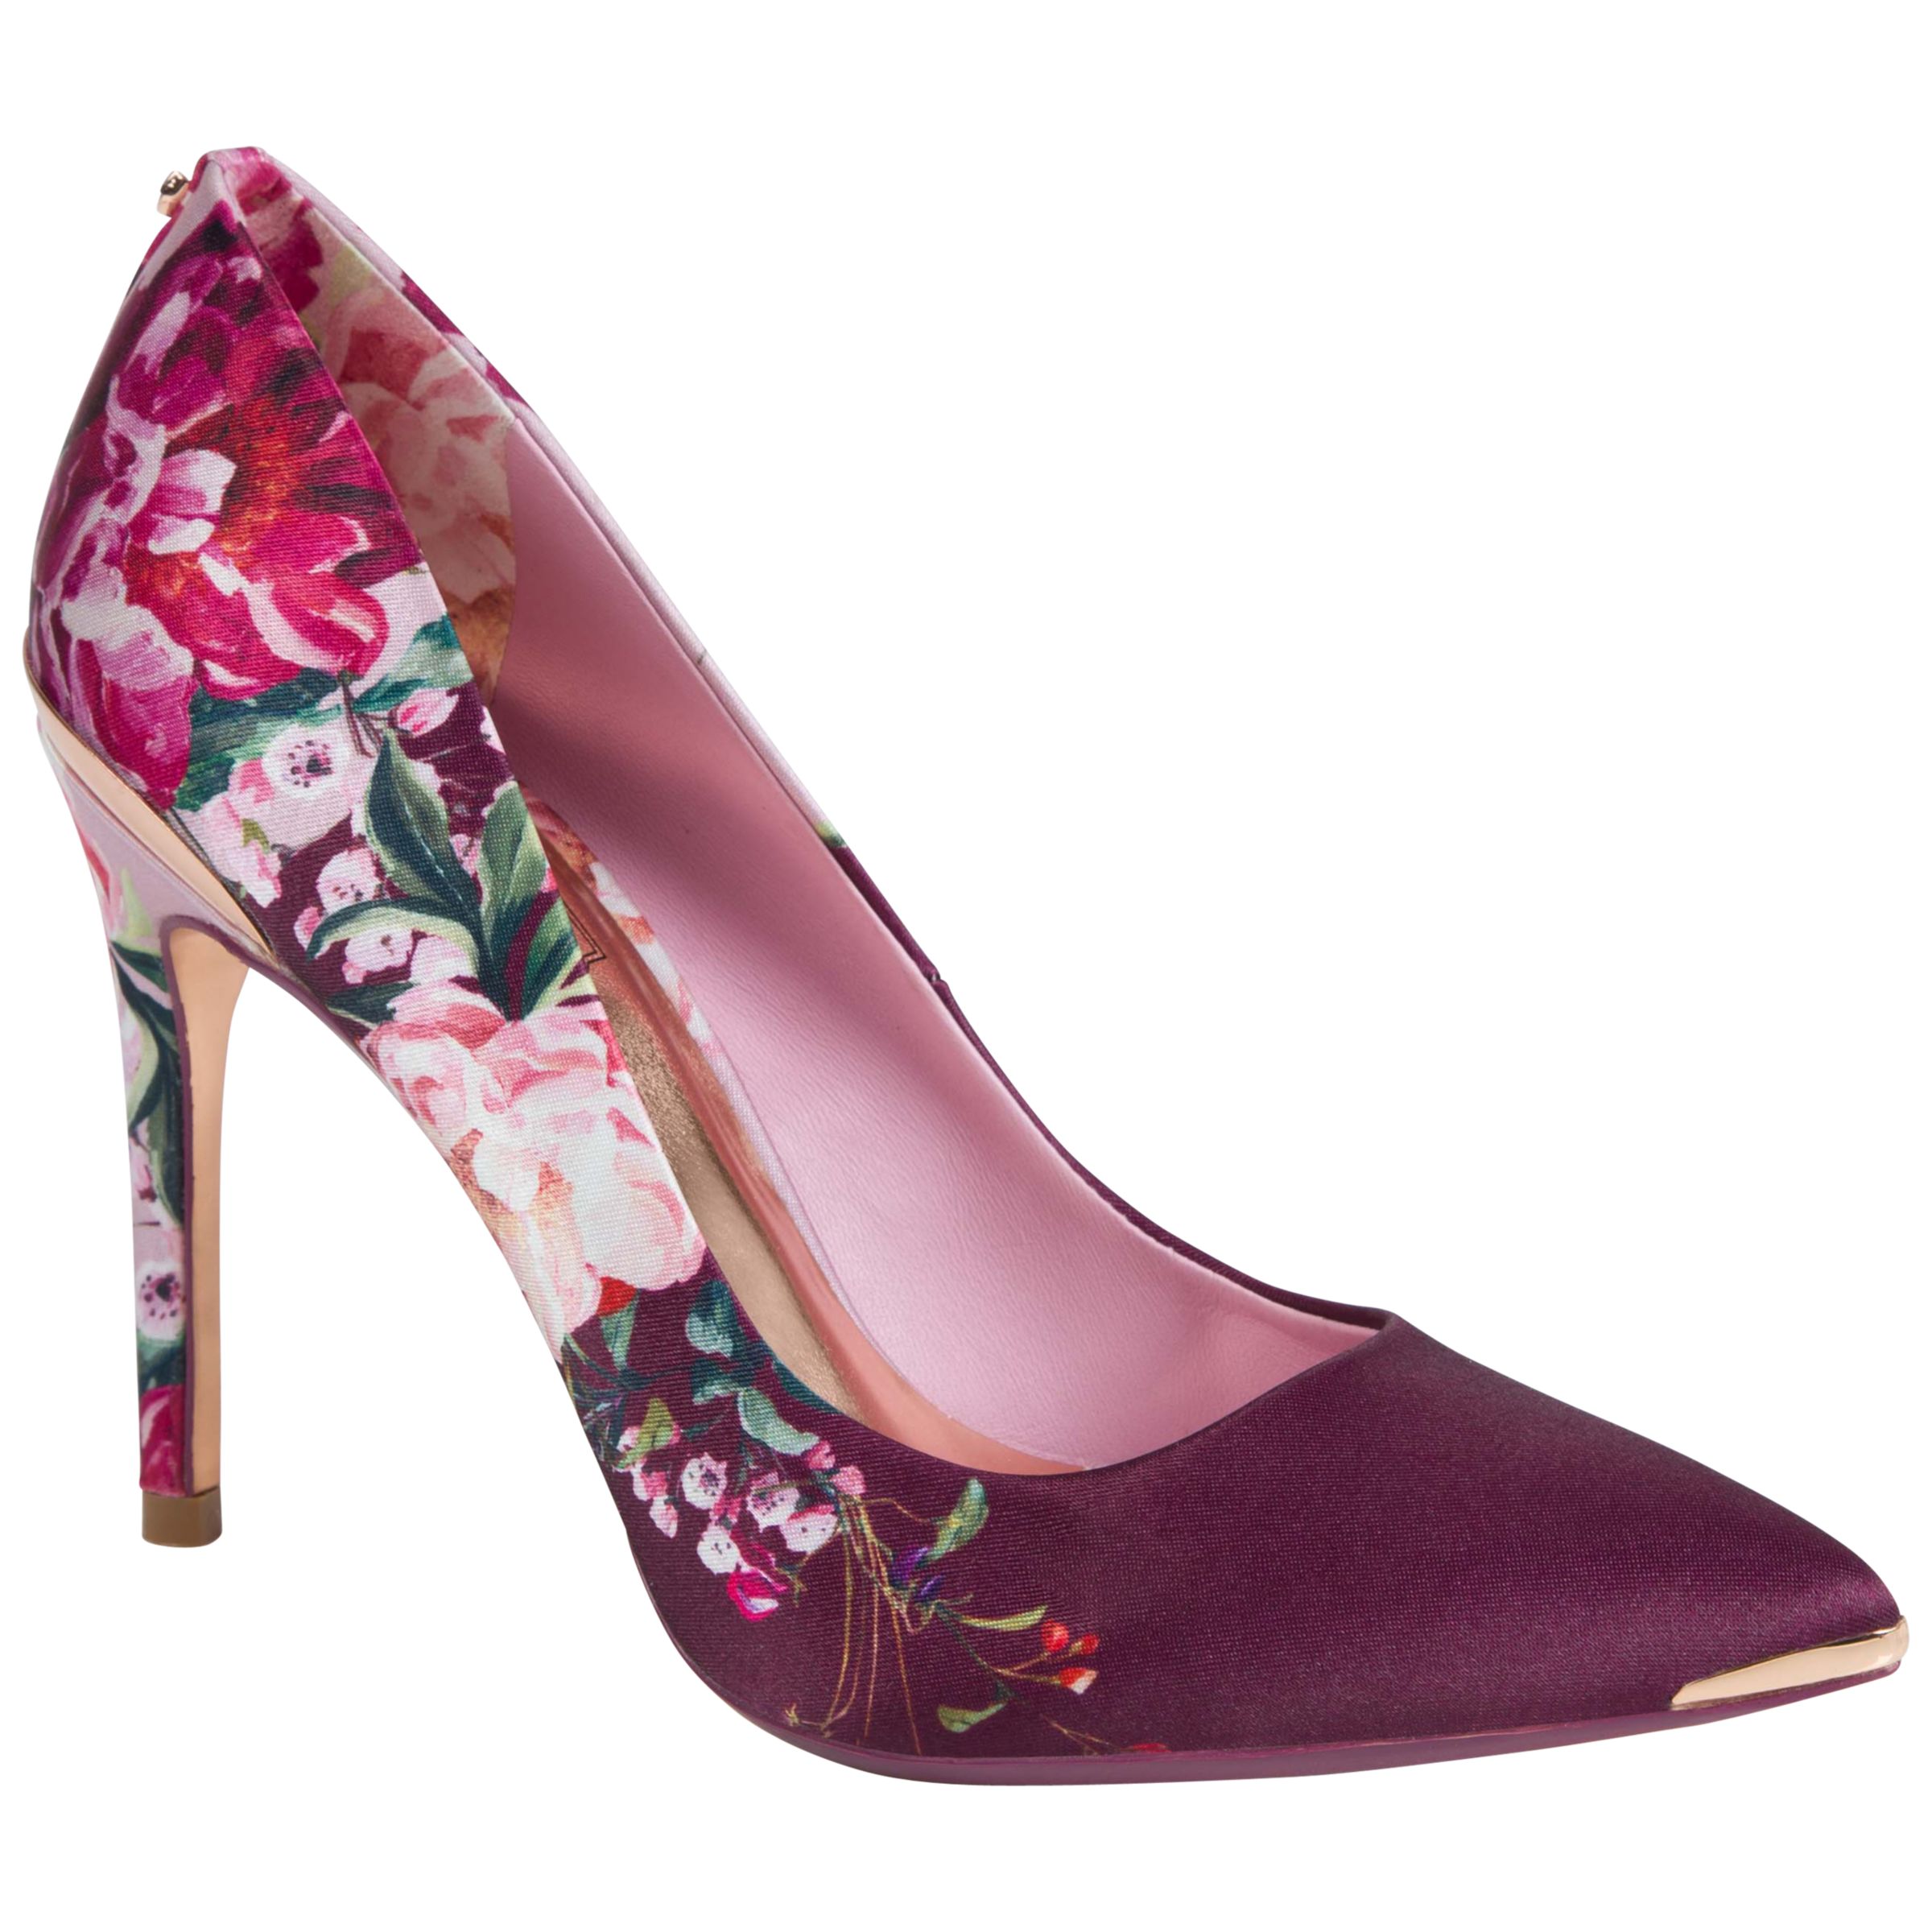 Ted Baker Kawaap Textile Heeled Court Shoes, Pink Multi